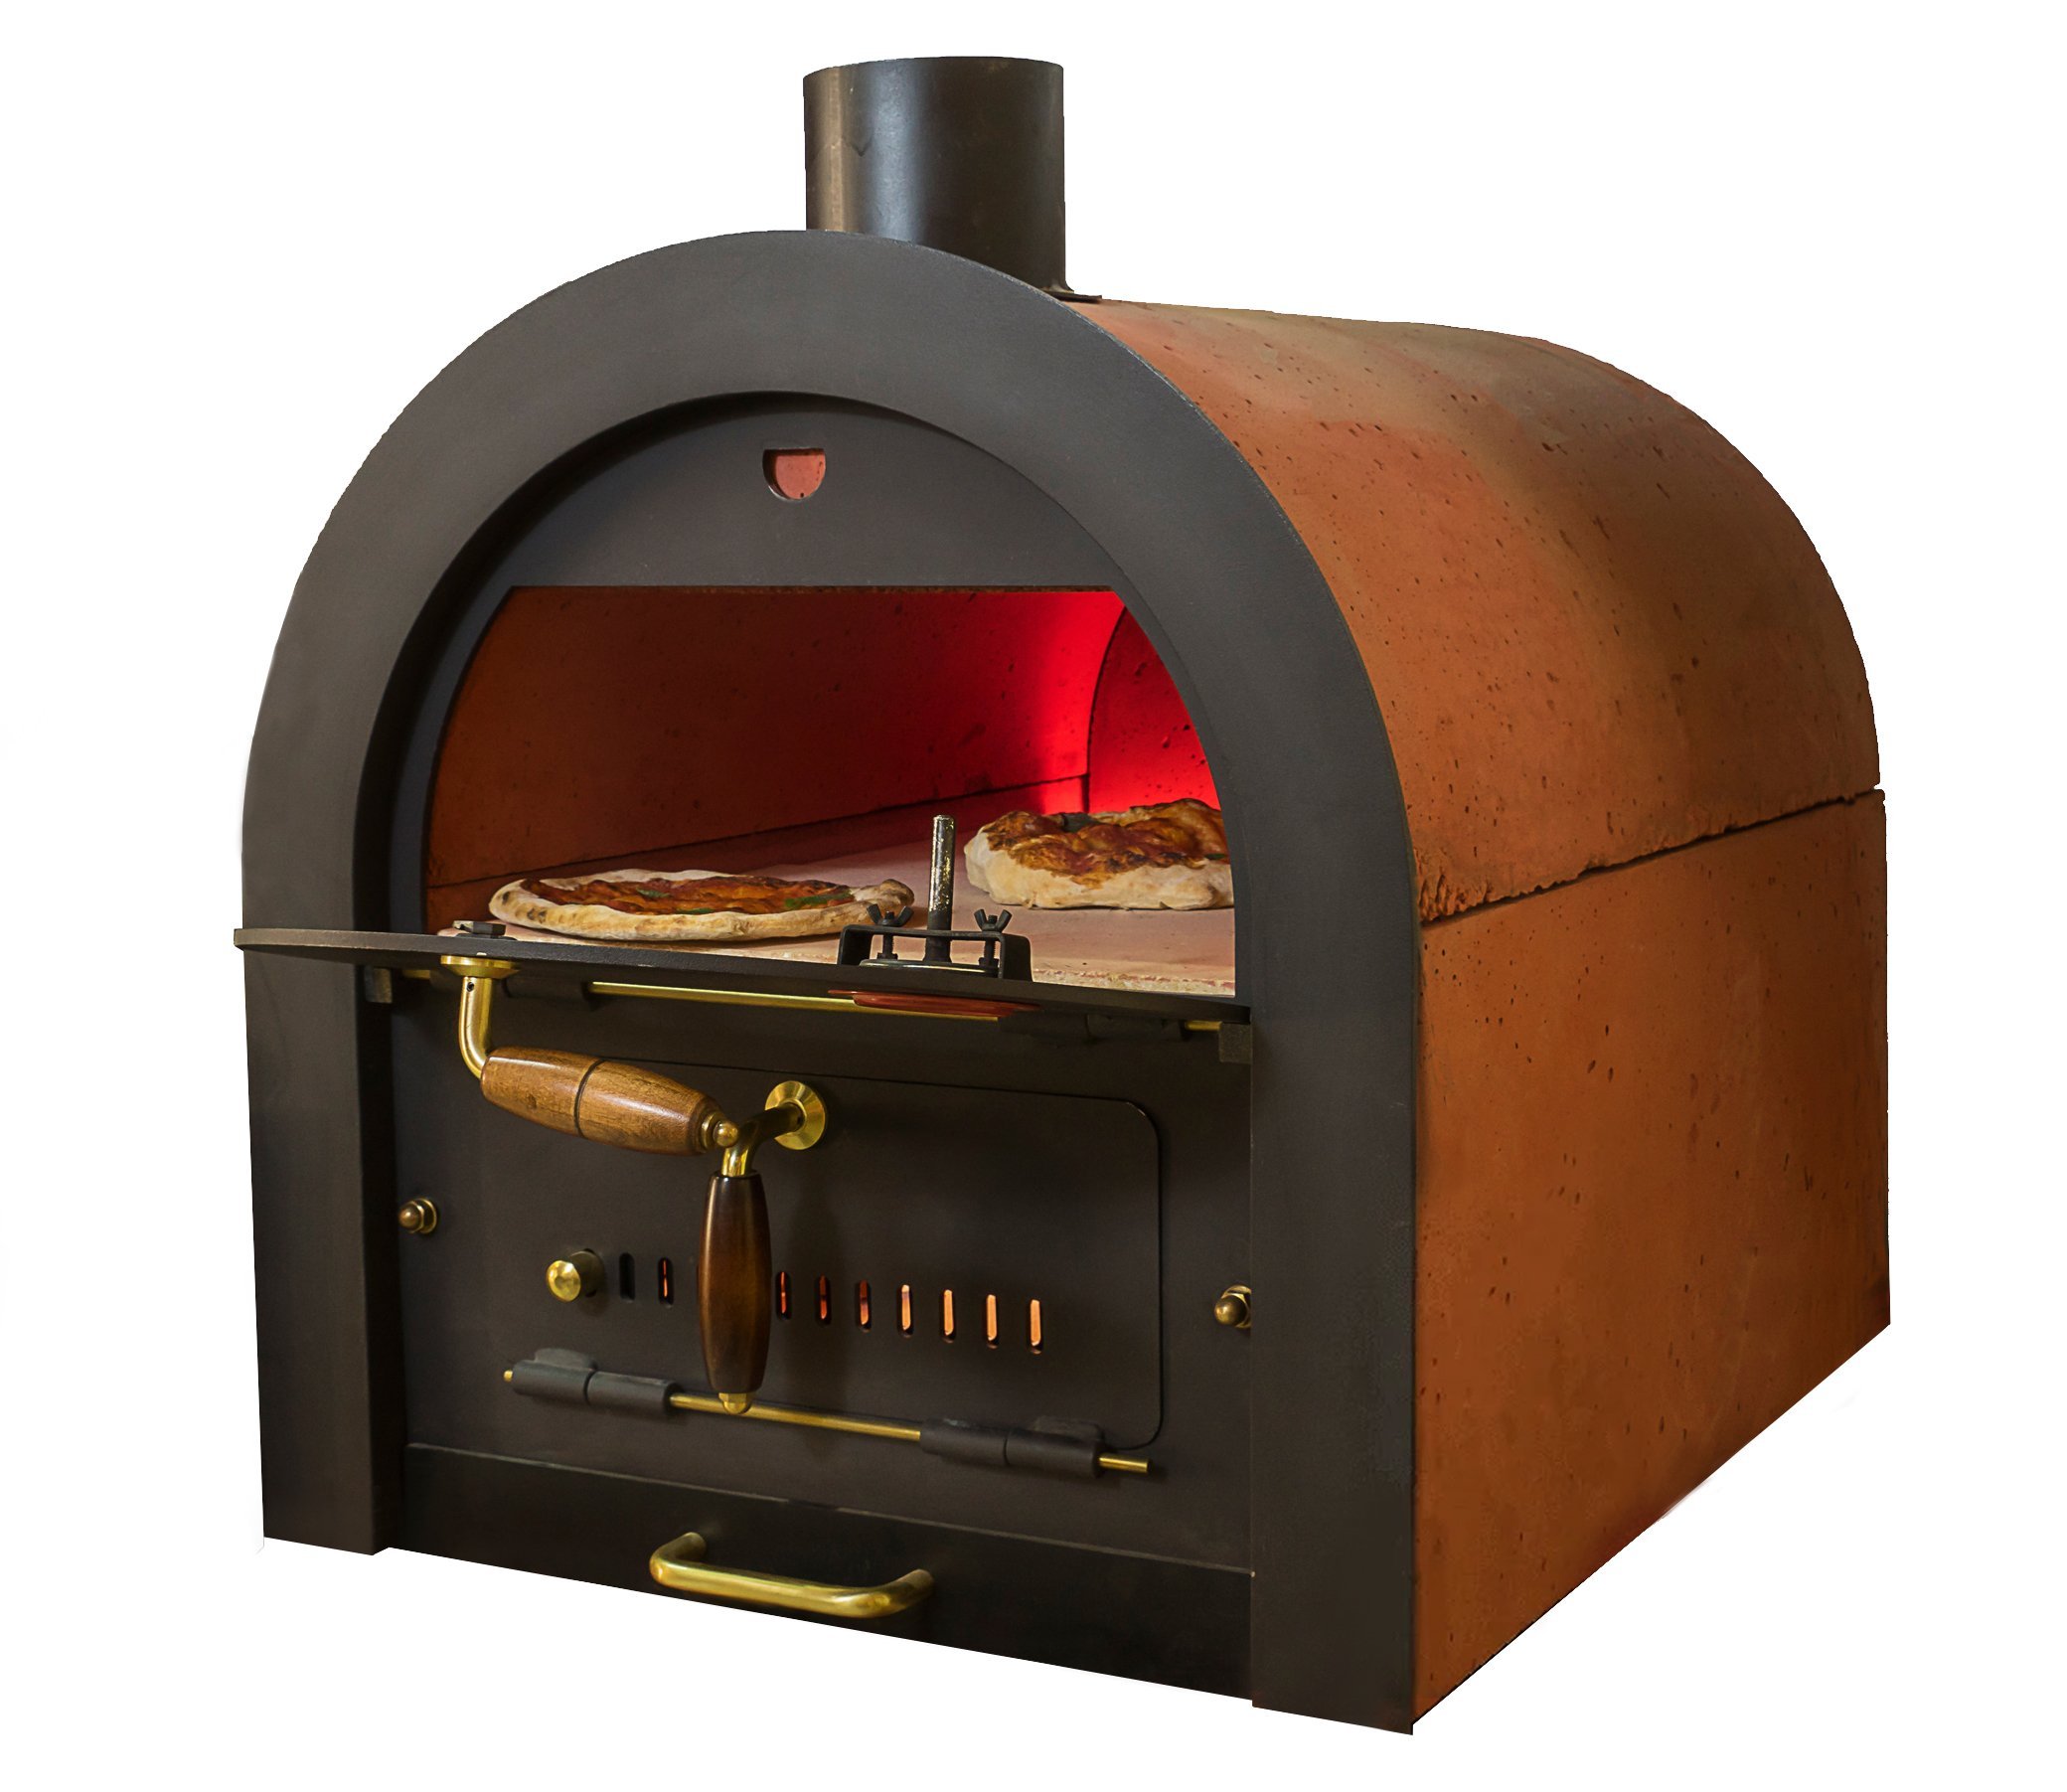 Kit pizza & wood oven from Valoriani with indirect firing, 40x60cm baking surface